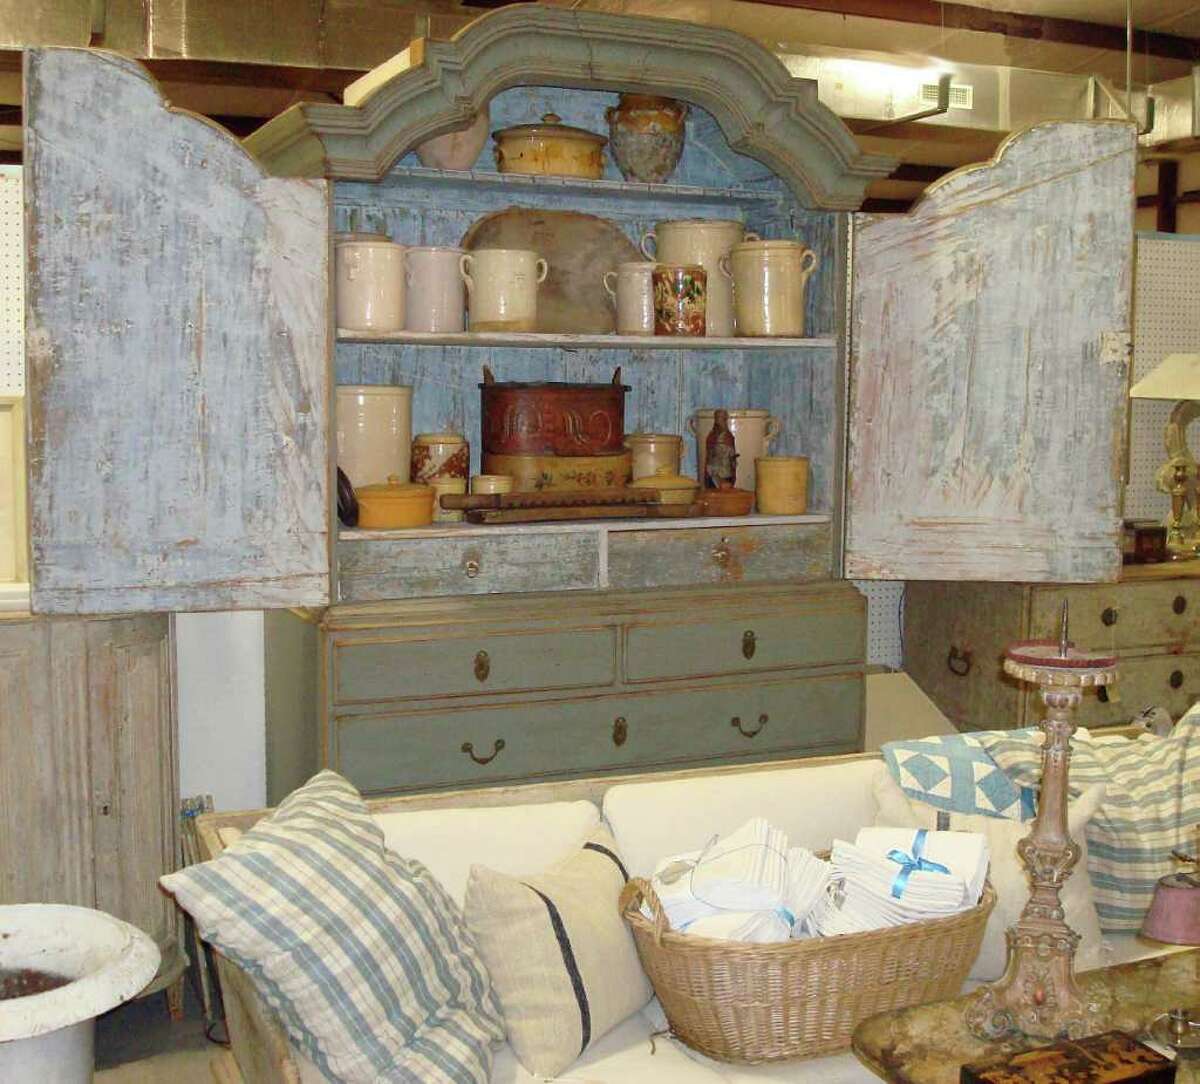 ORIGINAL ROUND TOP ANTIQUES FAIR ANTIQUES ABOUND: The Original Round Top Antiques Fair and related shows feature furniture, collectibles and more.